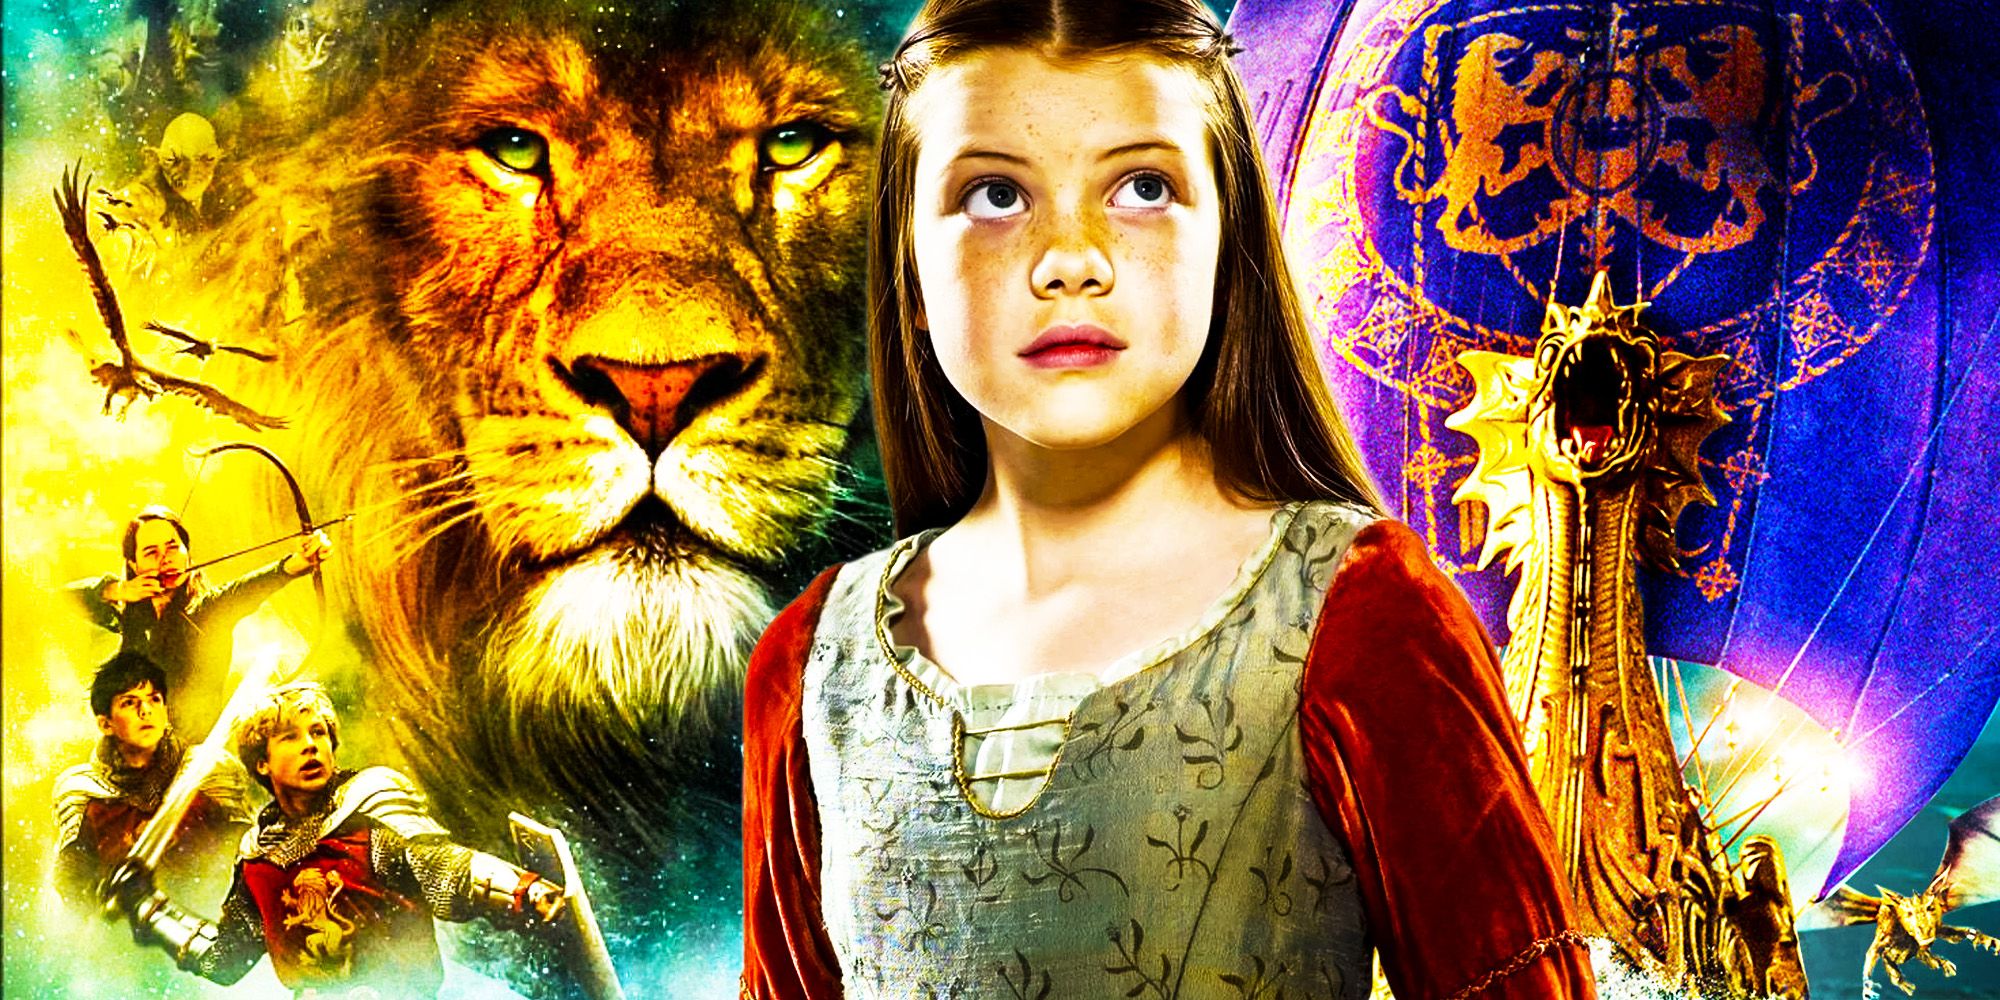 The Chronicles of Narnia ✓